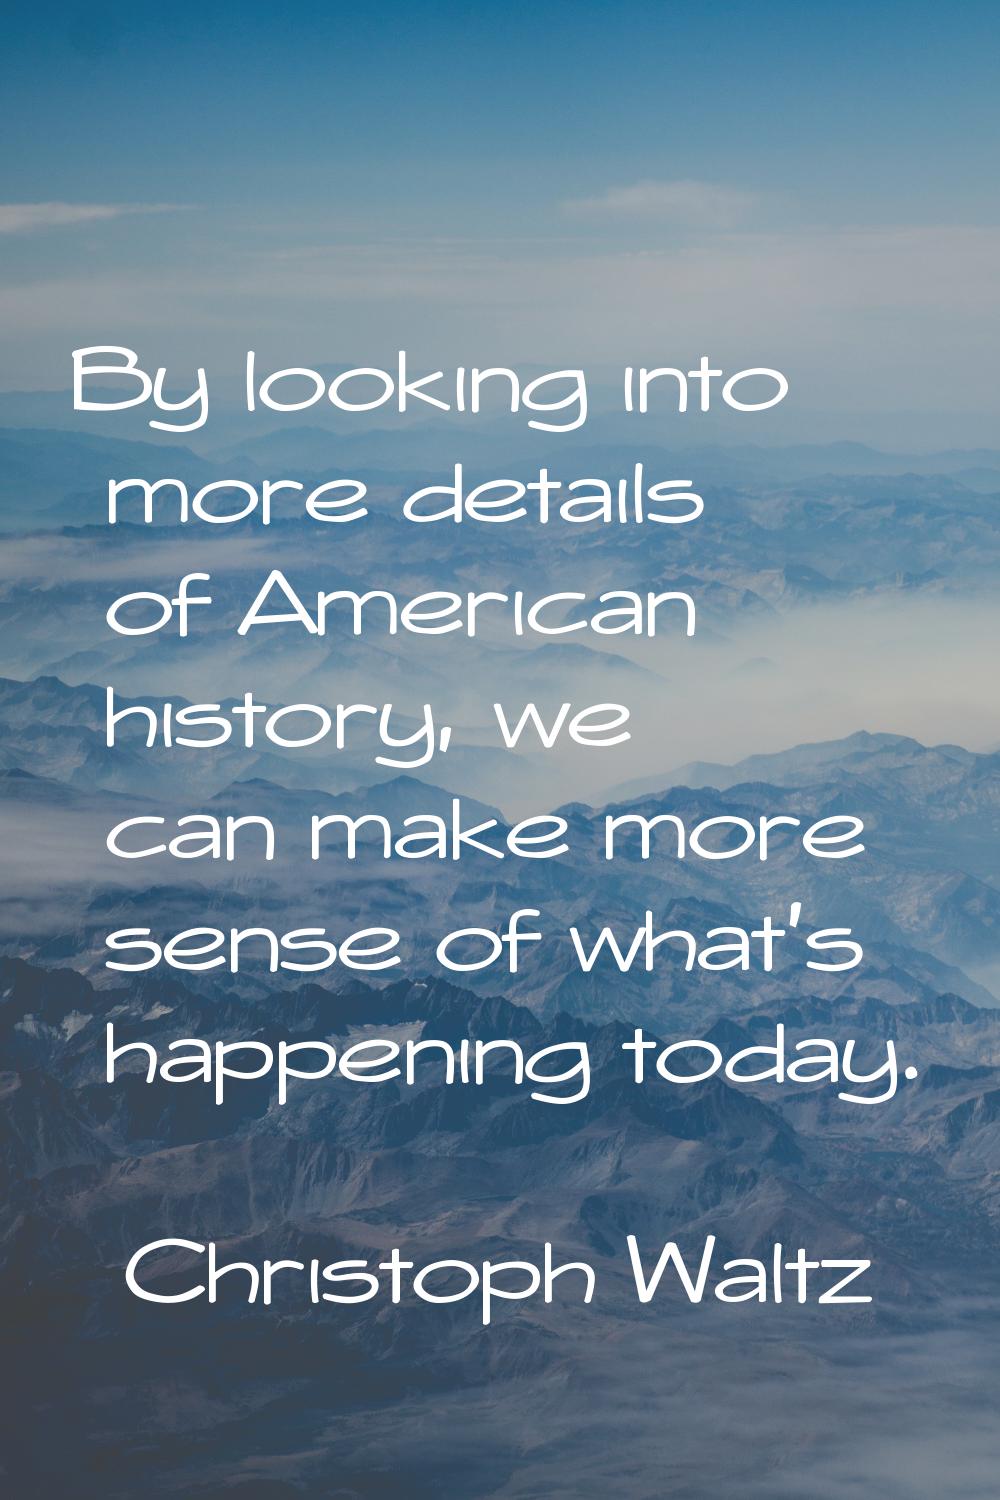 By looking into more details of American history, we can make more sense of what's happening today.